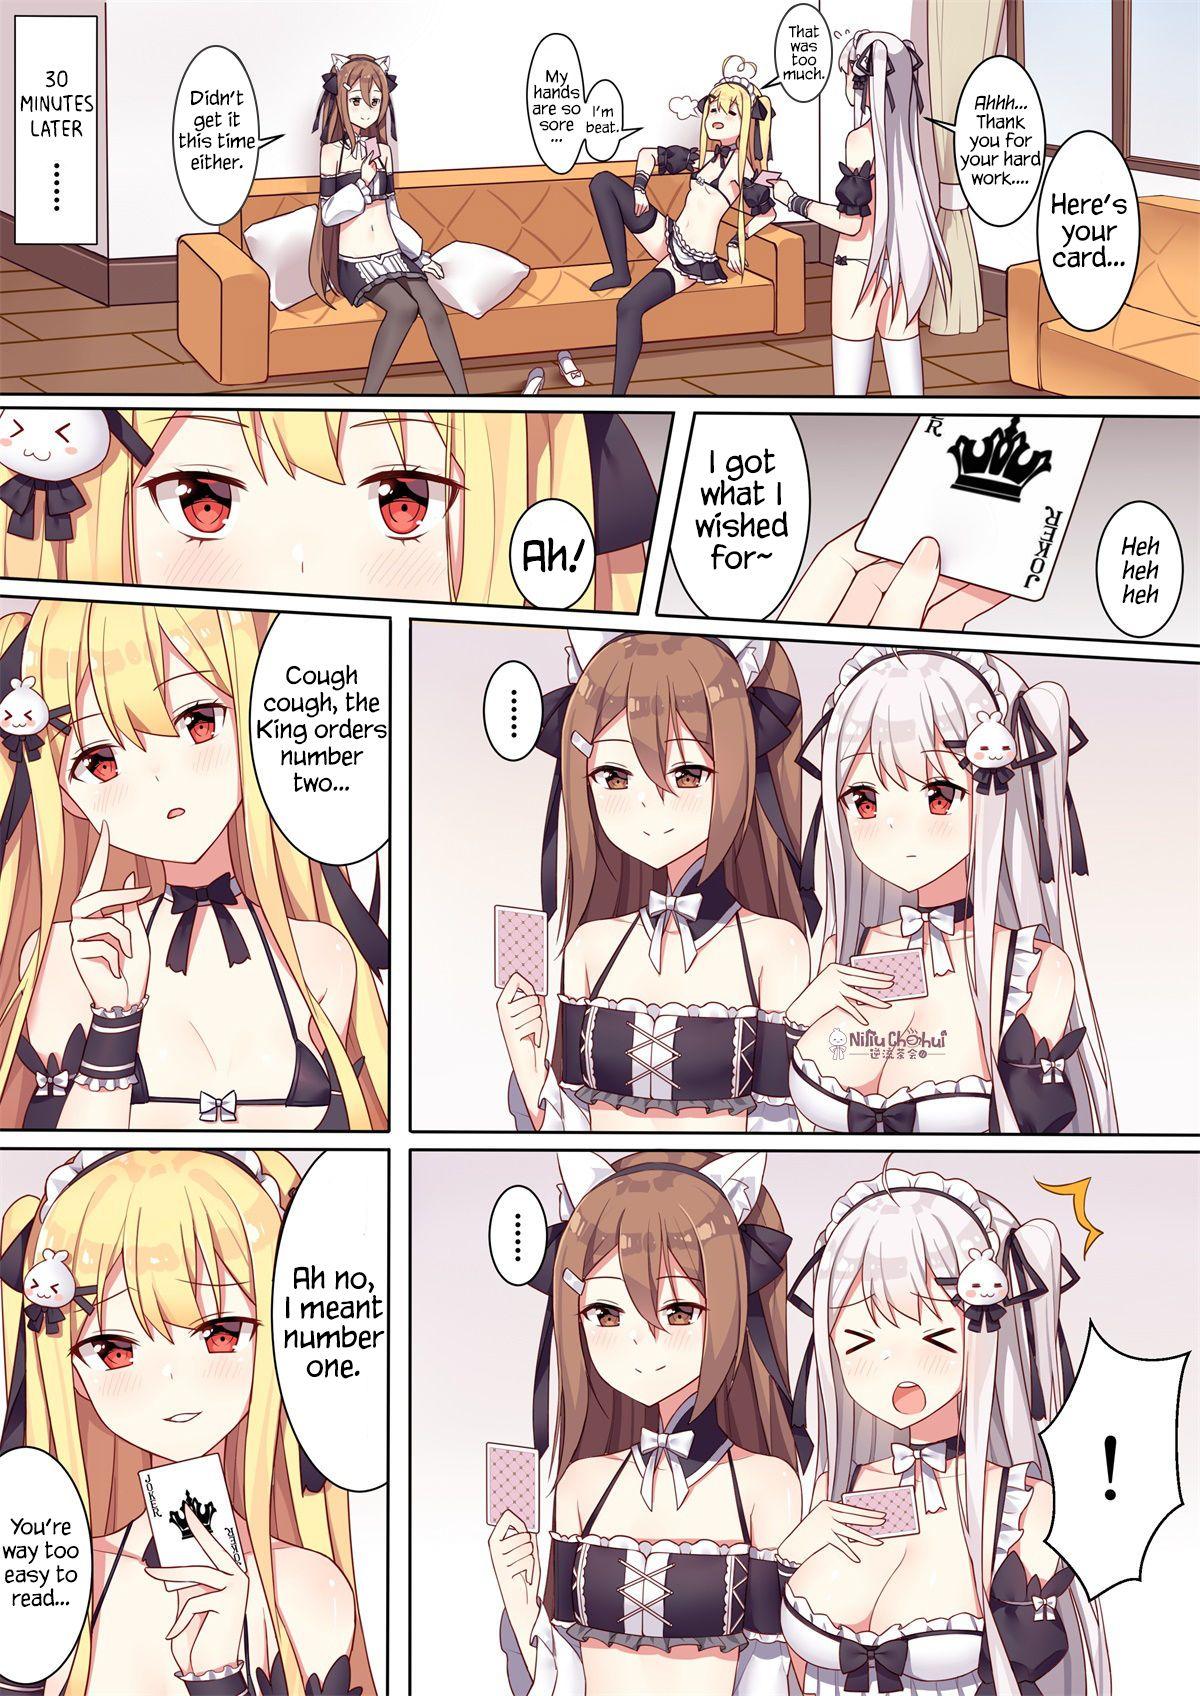 Old And Young Girls and the King's Tea Party - Original Job - Page 7